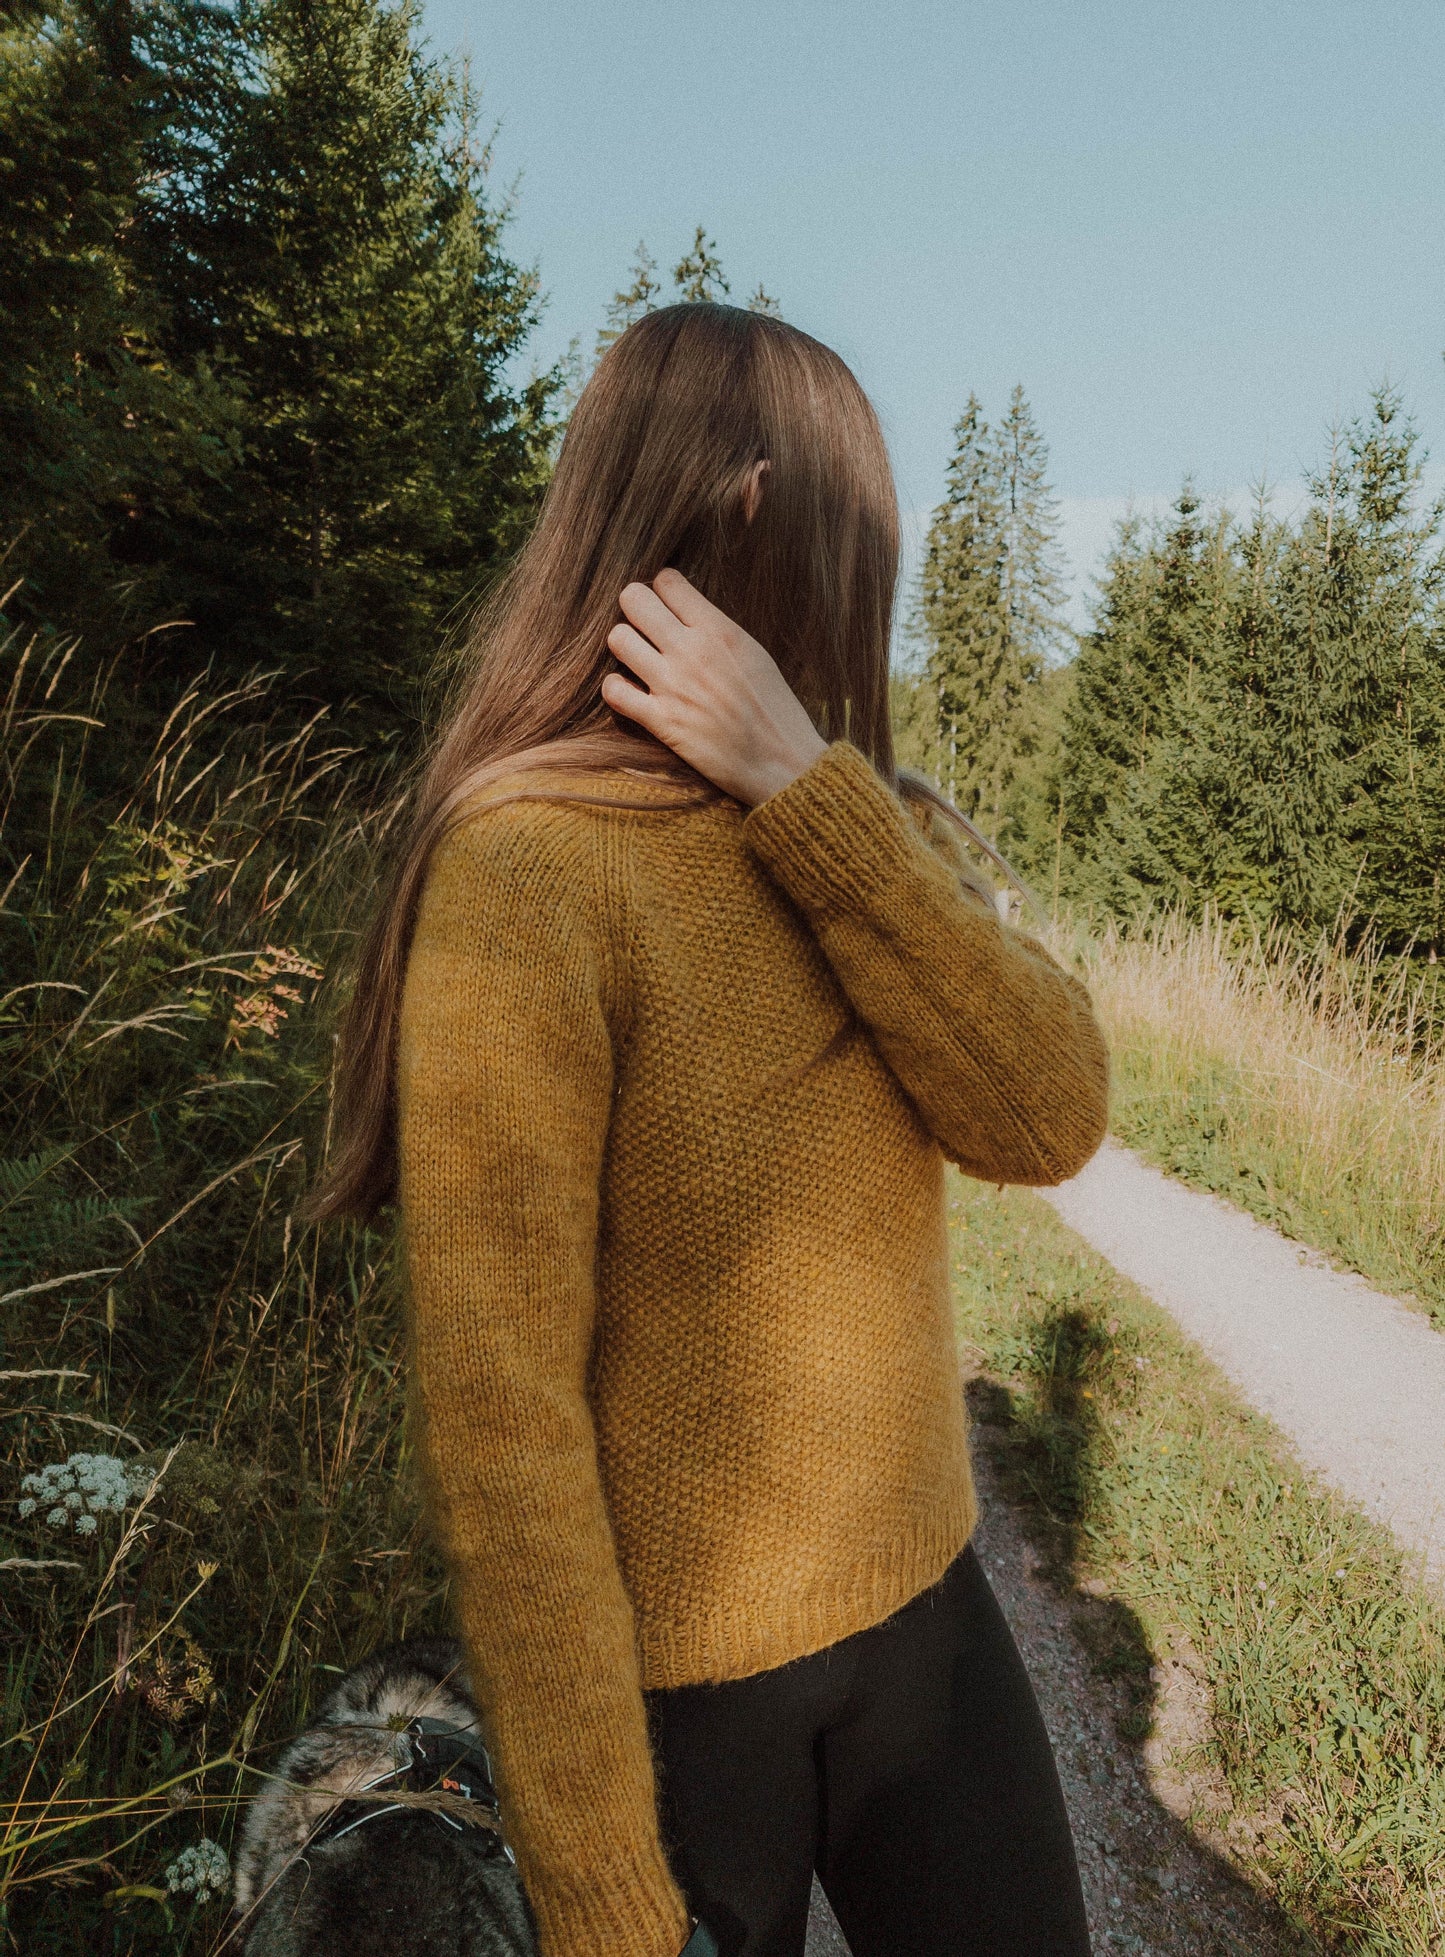 Full view of the 'Before Fall Sweater' by Ulven, worn by the designer against the serene backdrop of a forest road encased by trees on a late summer day. The amber-yellow sweater, knit with unspun Nutiden yarn from Höner och Eir, features a ribbed raglan seam and textured seed stitch, fully displayed in natural light.